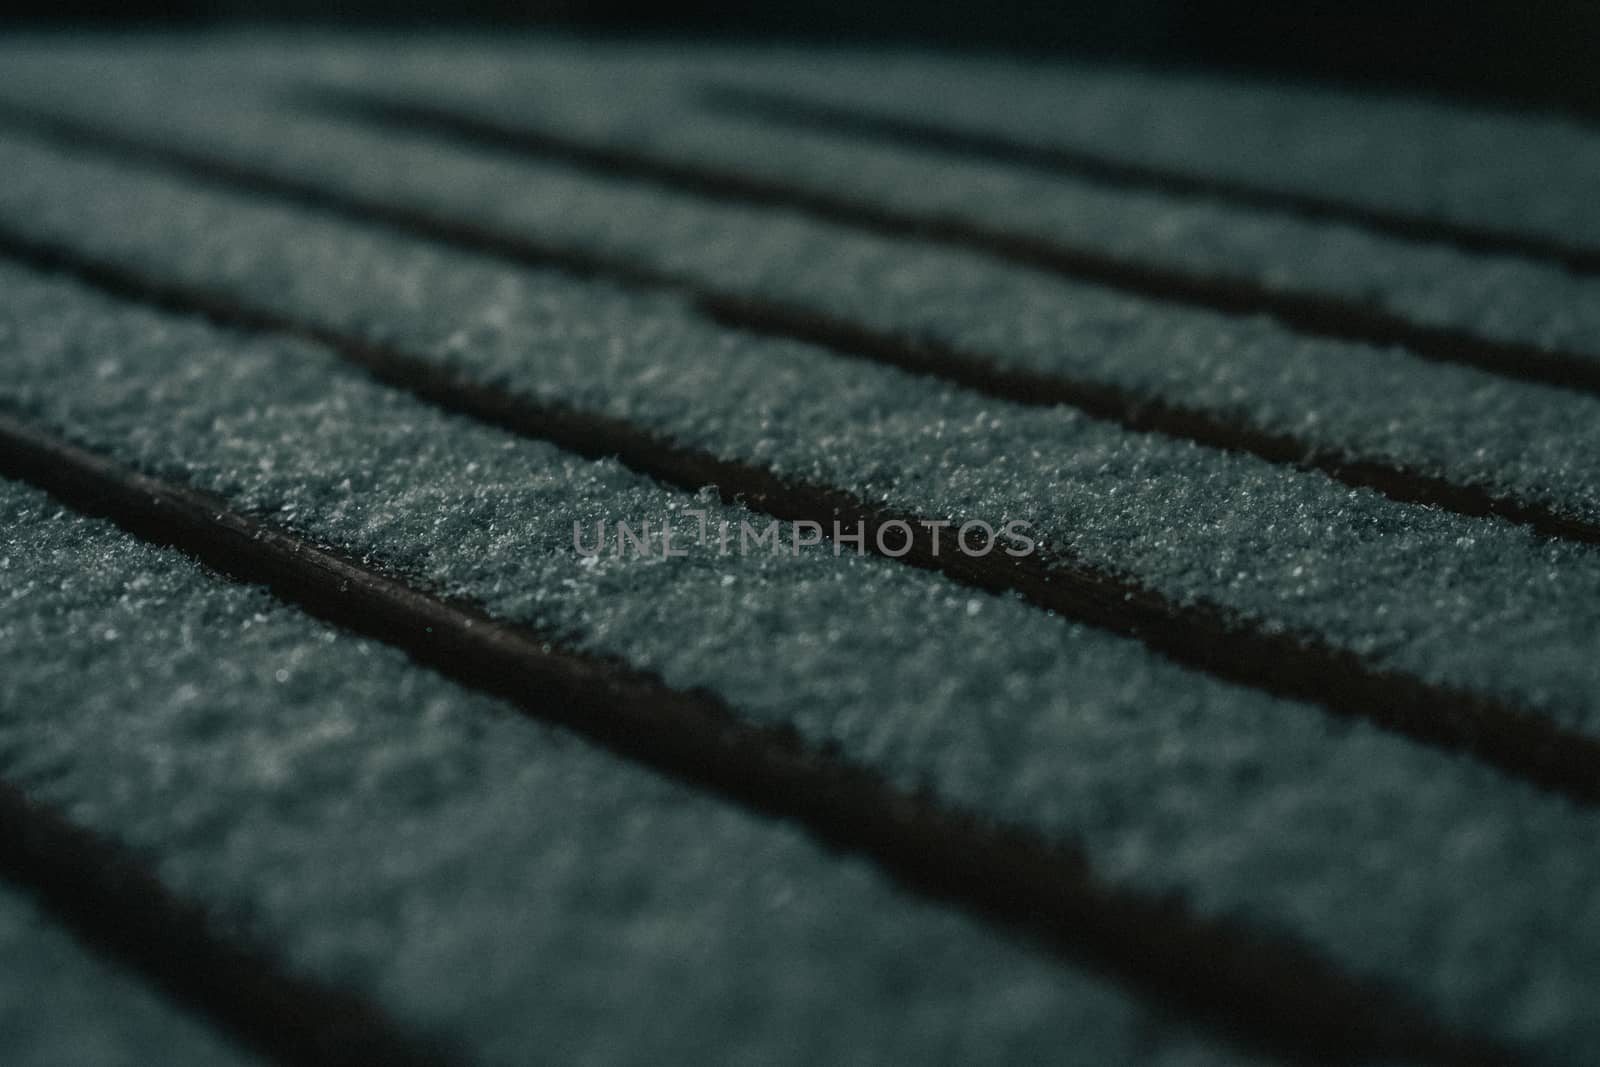 A Close-Up Shot of a Wooden Seat Covered in a Fresh Layer of Snow